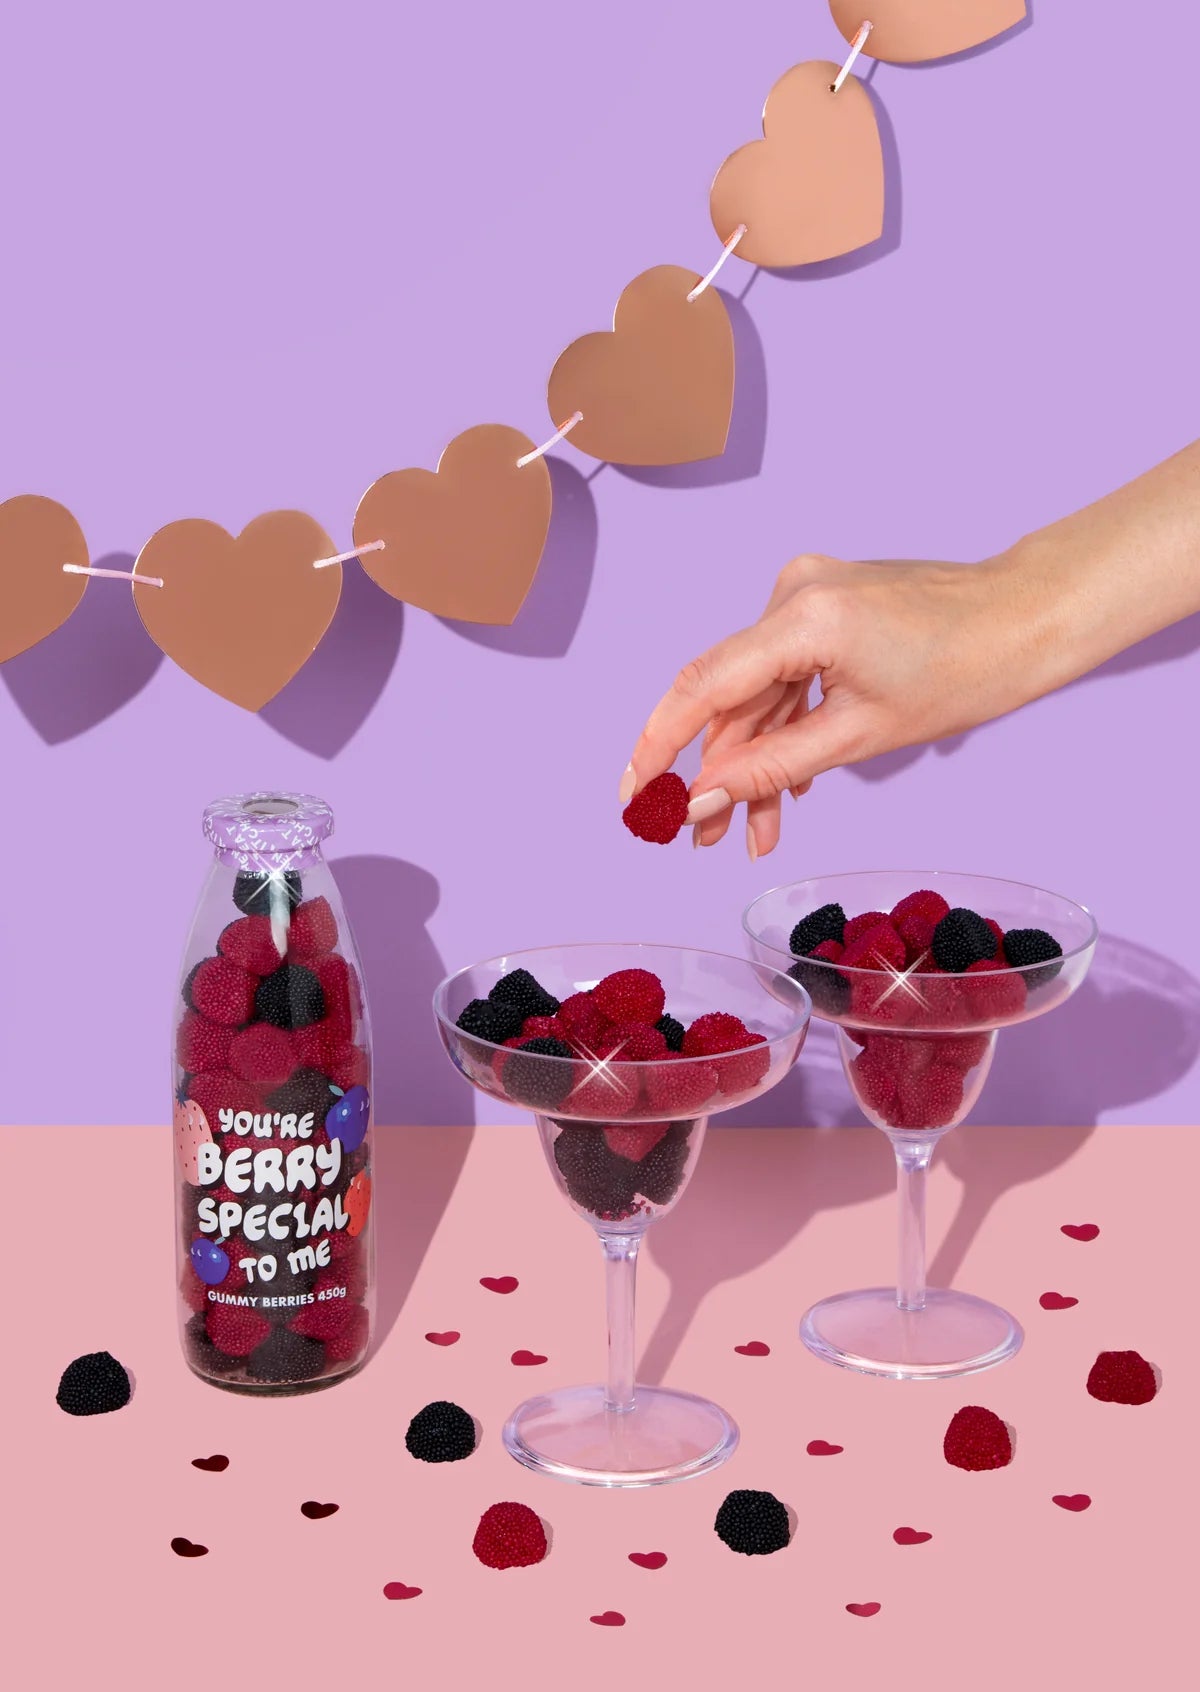 'YOU'RE BERRY SPECIAL TO ME" GUMMY BERRIES IN A GLASS BOTTLE